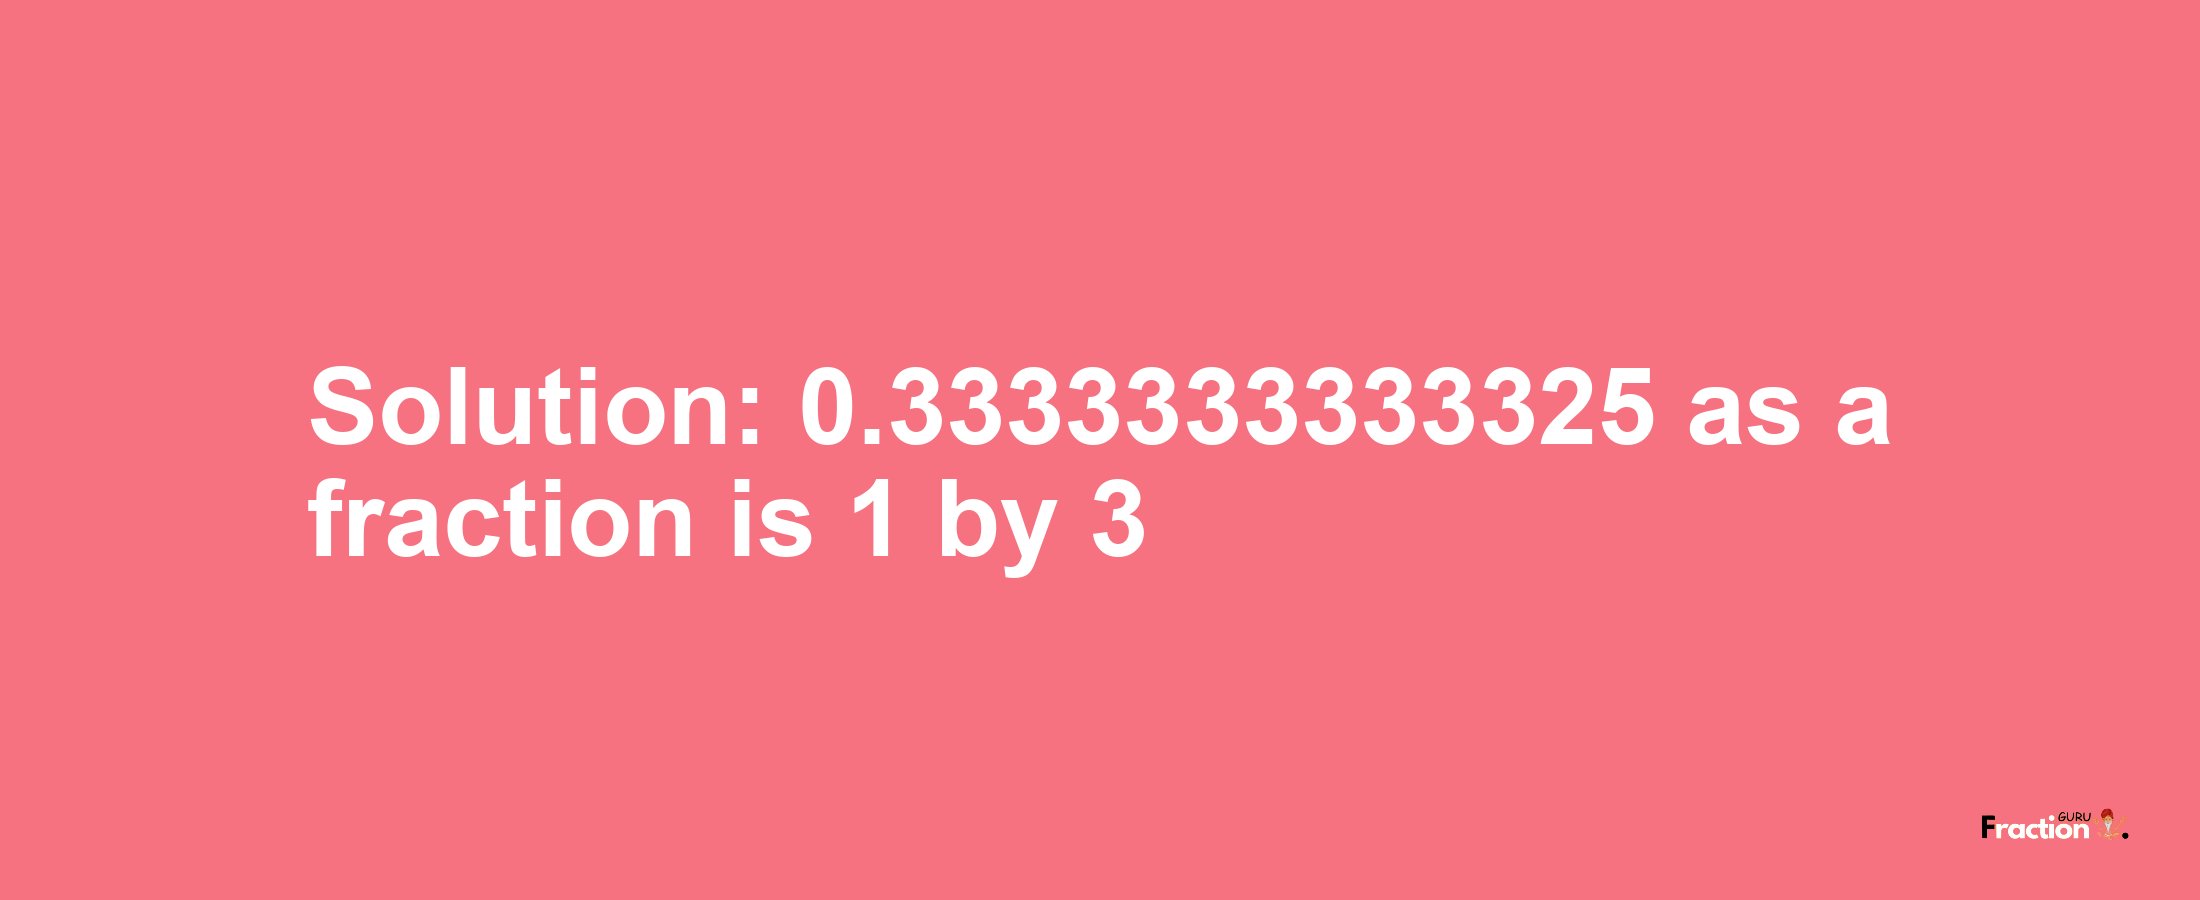 Solution:0.3333333333325 as a fraction is 1/3